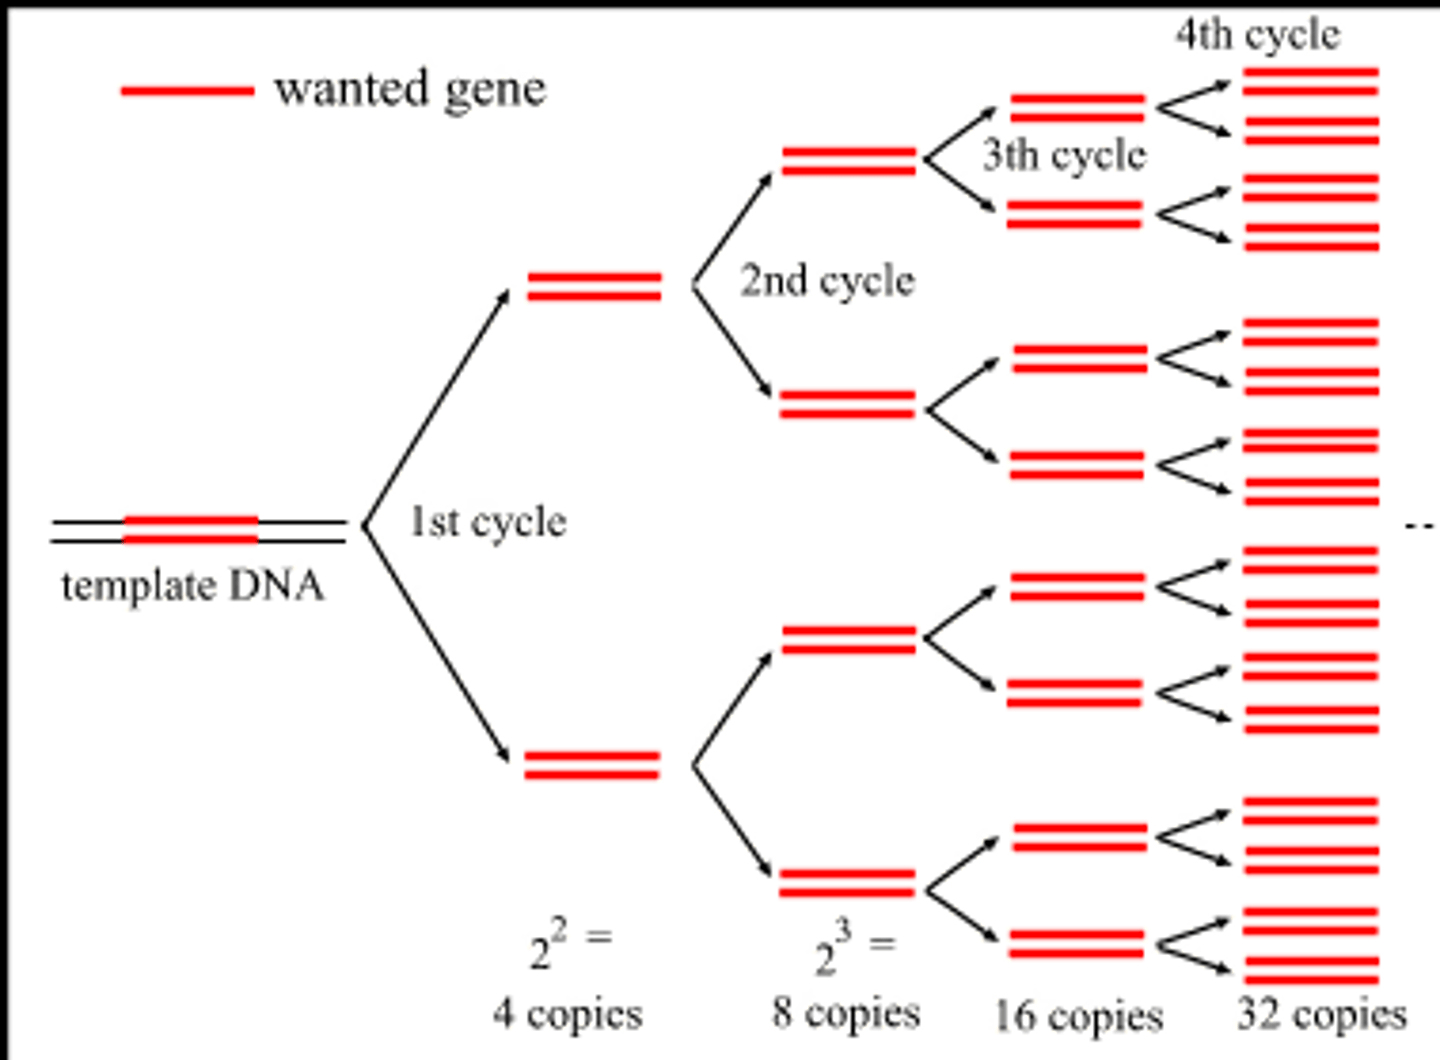 <p>A technique for amplifying DNA in vitro by incubating with special primers, DNA polymerase molecules, and nucleotides.</p>